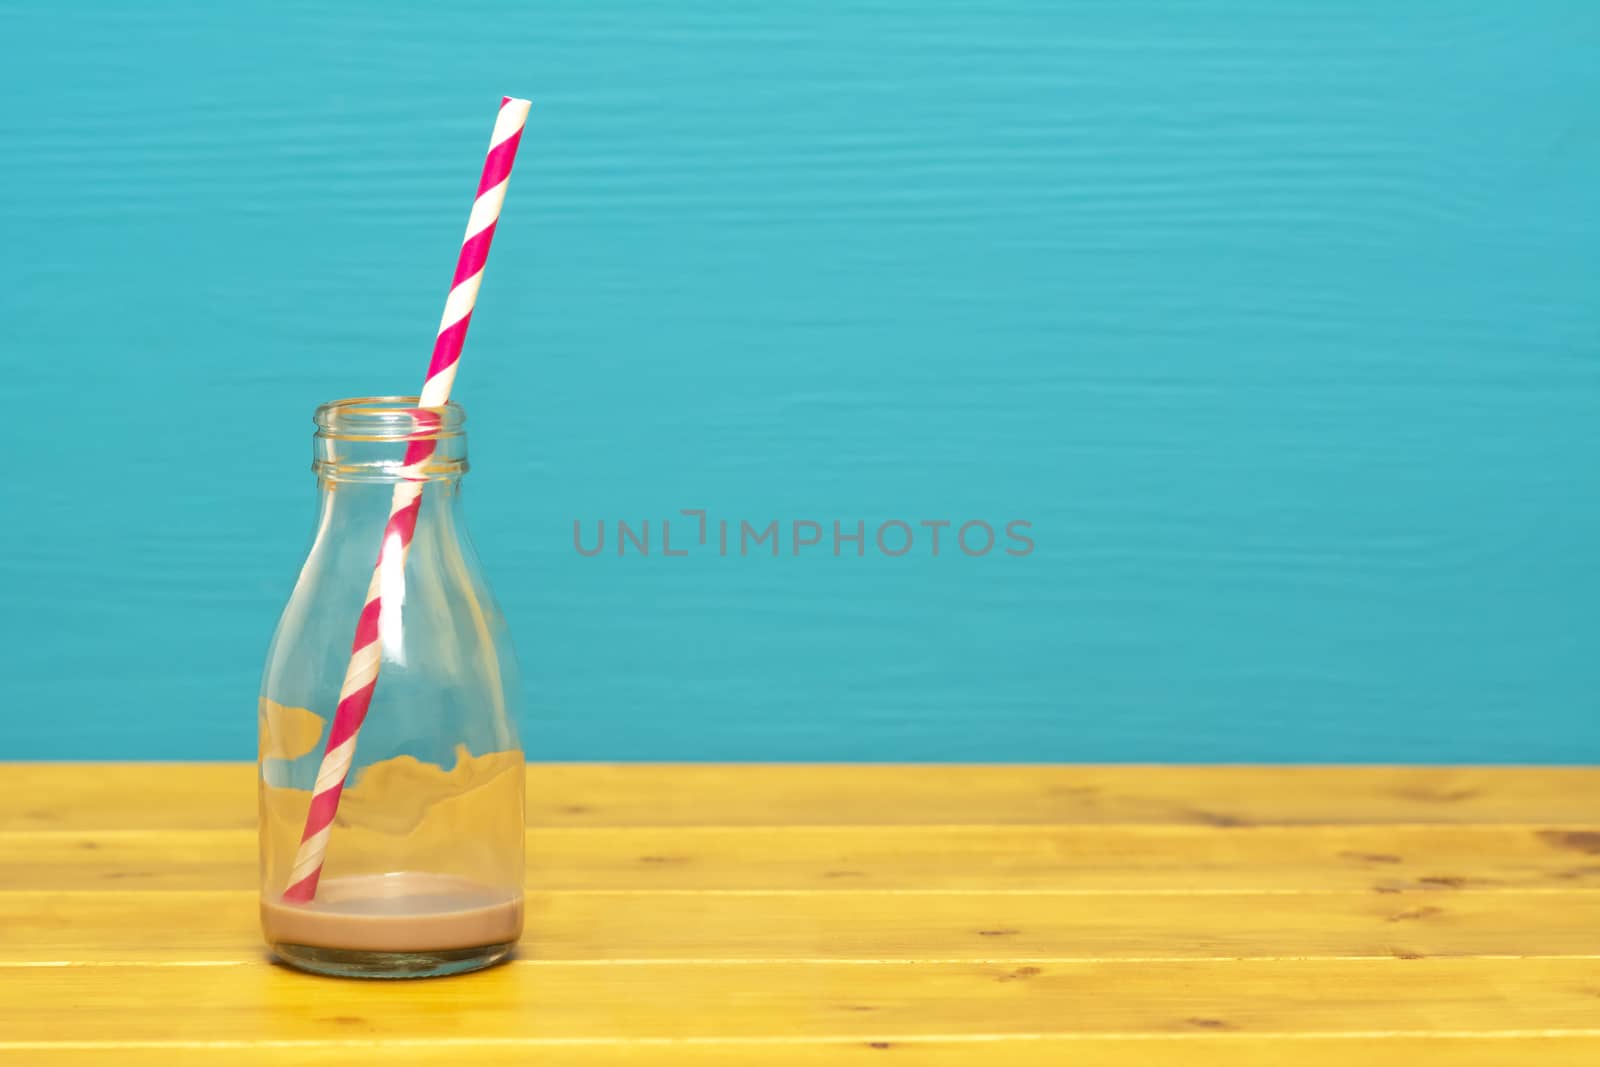 One-third pint glass milk bottle with dregs of chocolate milkshake with a retro paper straw, on a wooden table against a teal background